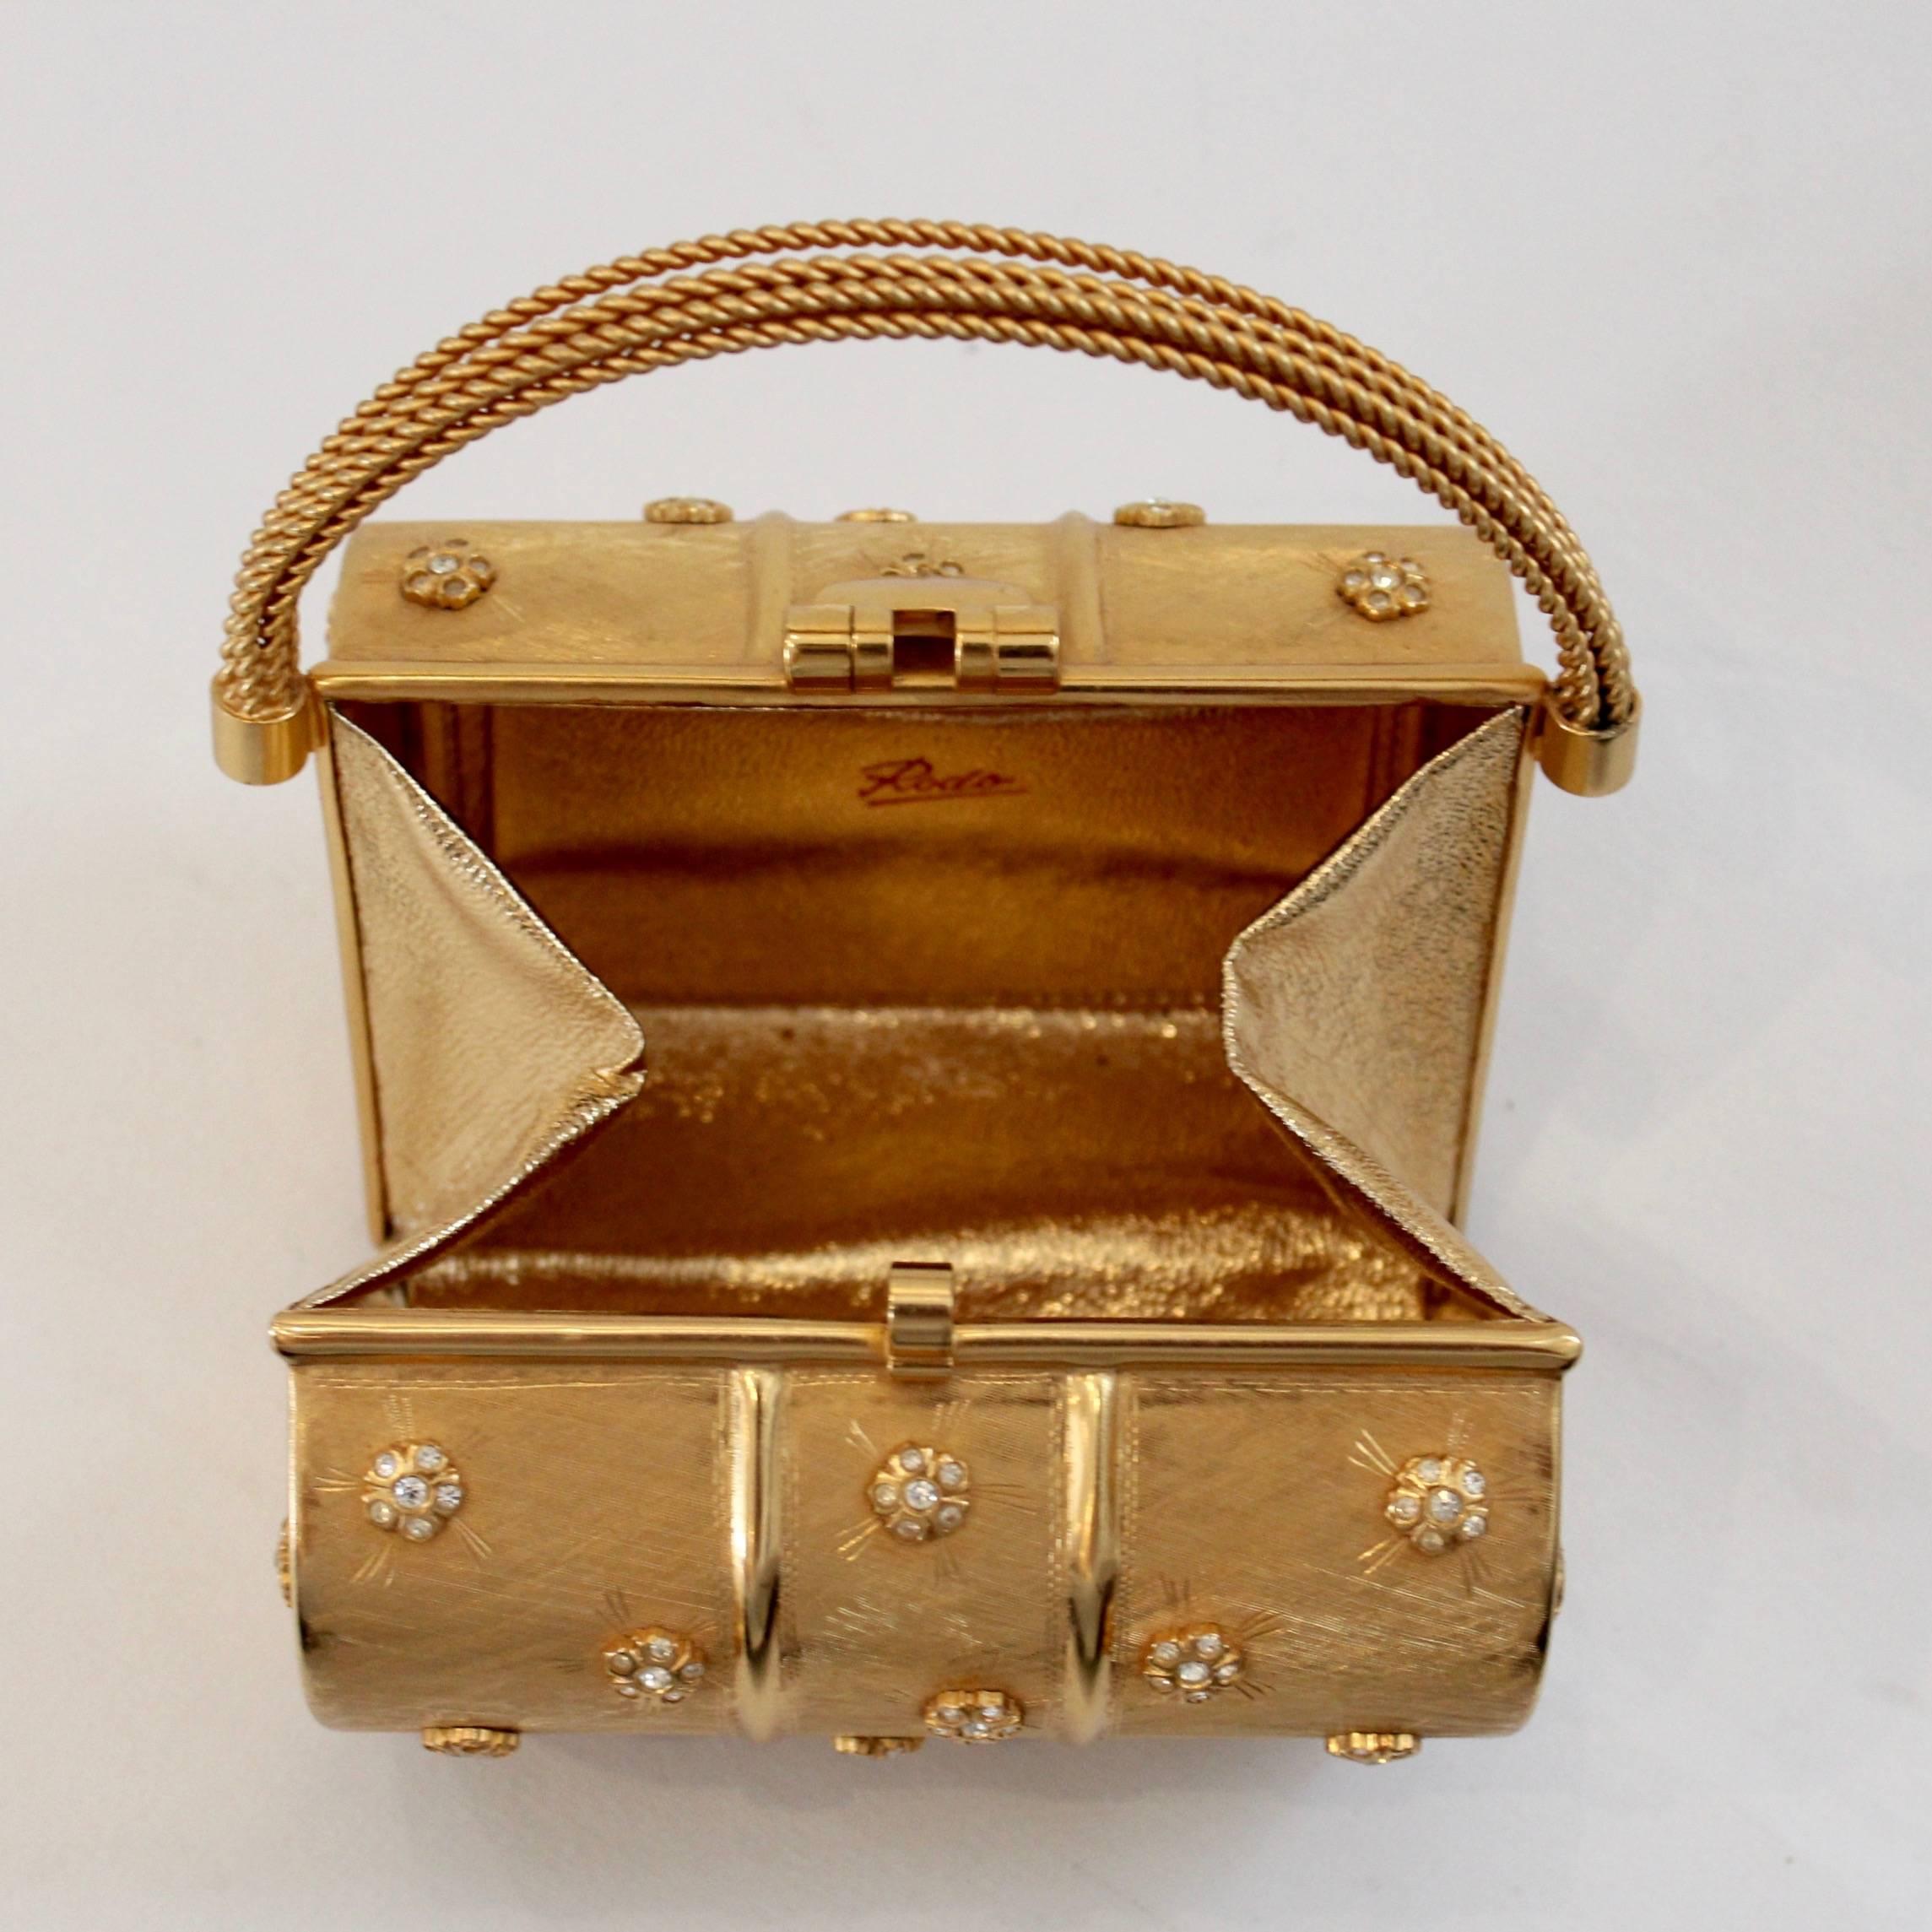 This square gold Rodo evening bag is a 1970s treasure. This structured boxed bag is decorated with small rhinestones and features a woven metal handle. The interior is gold lined and includes a pocket for your smallest possessions. A snap down clip